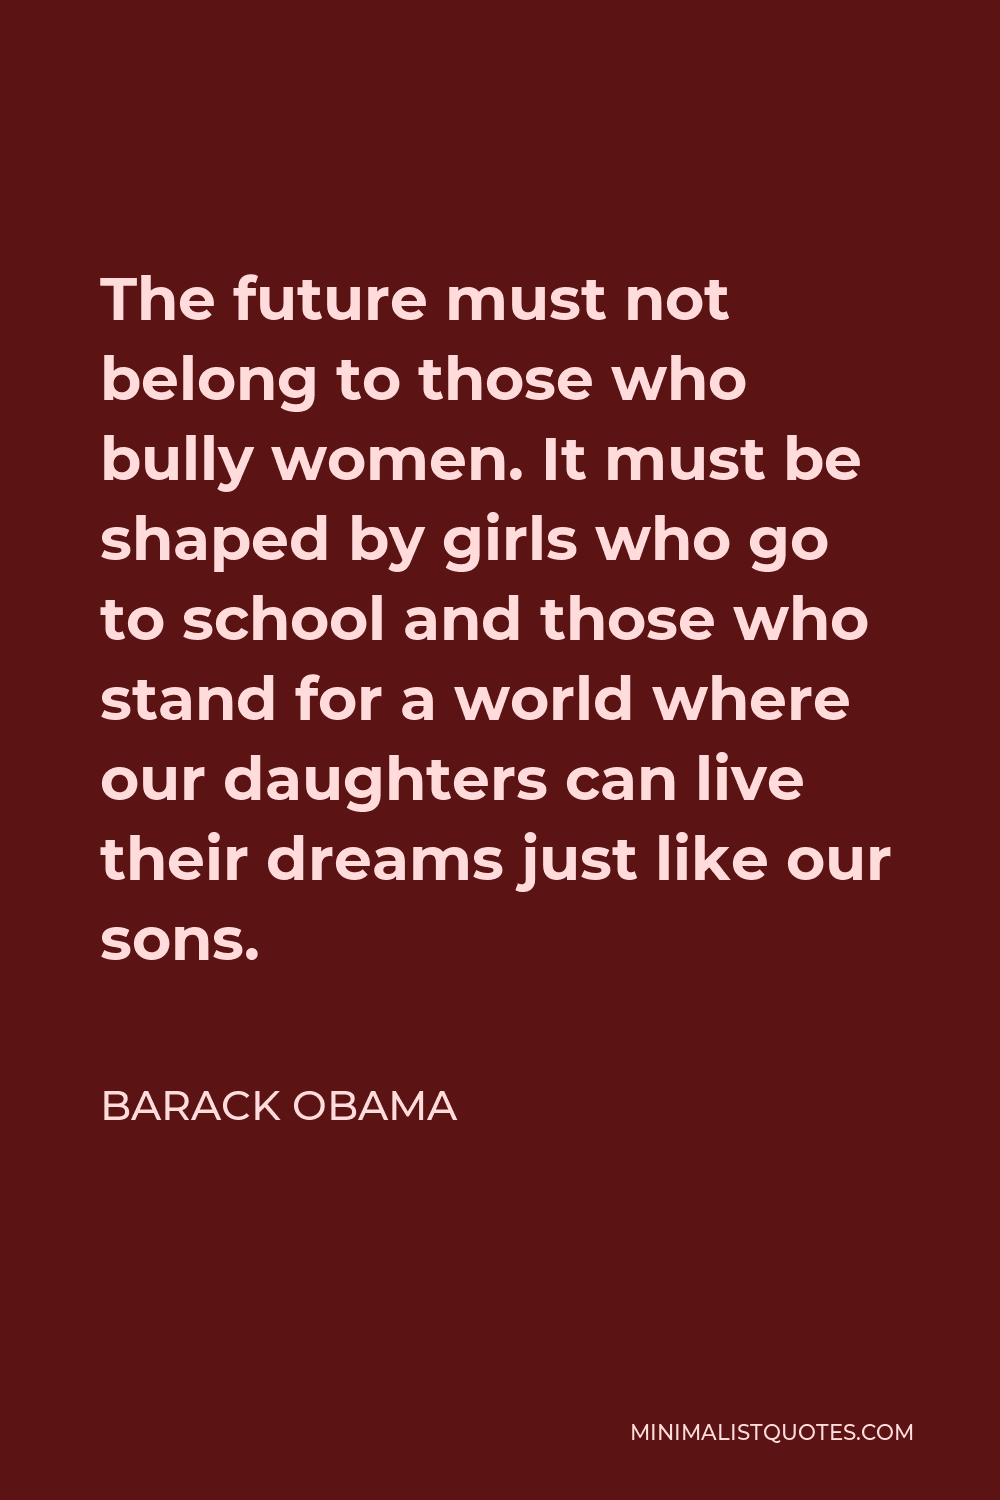 Barack Obama Quote - The future must not belong to those who bully women. It must be shaped by girls who go to school and those who stand for a world where our daughters can live their dreams just like our sons.